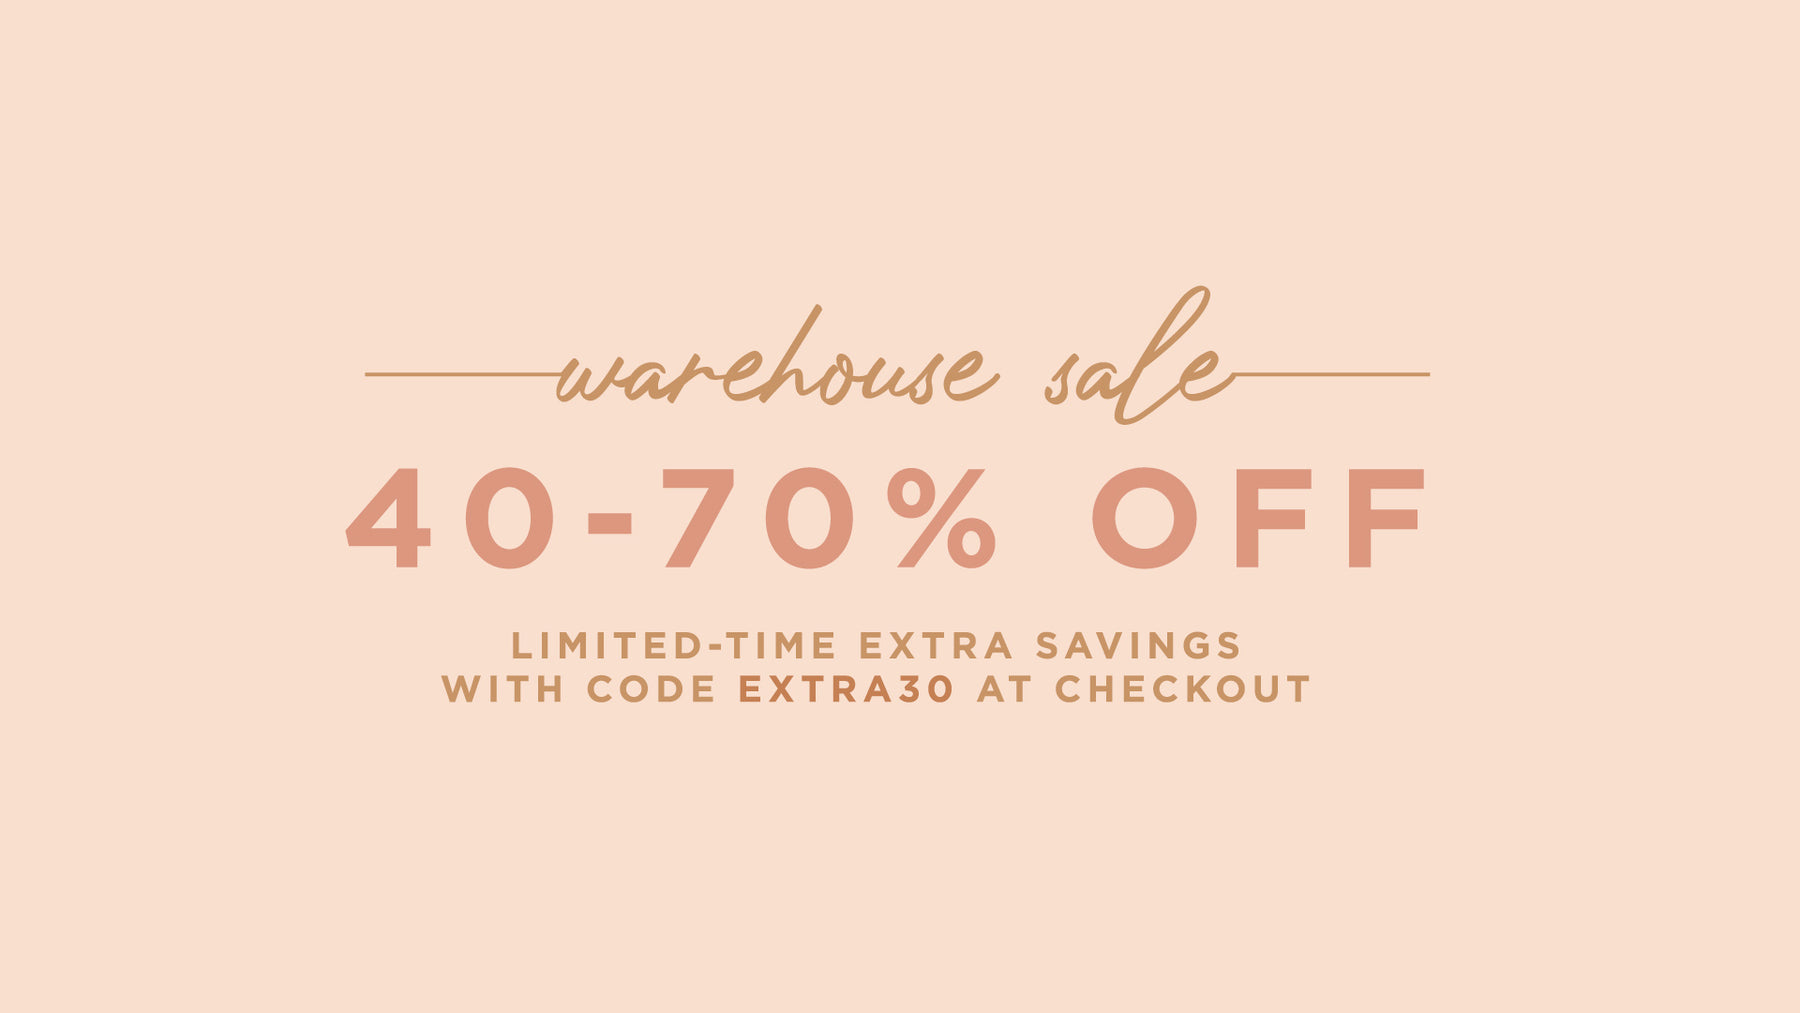 Warehouse Sale - 40-70% off Limited-time extra savings with code EXTRA30 at checkout